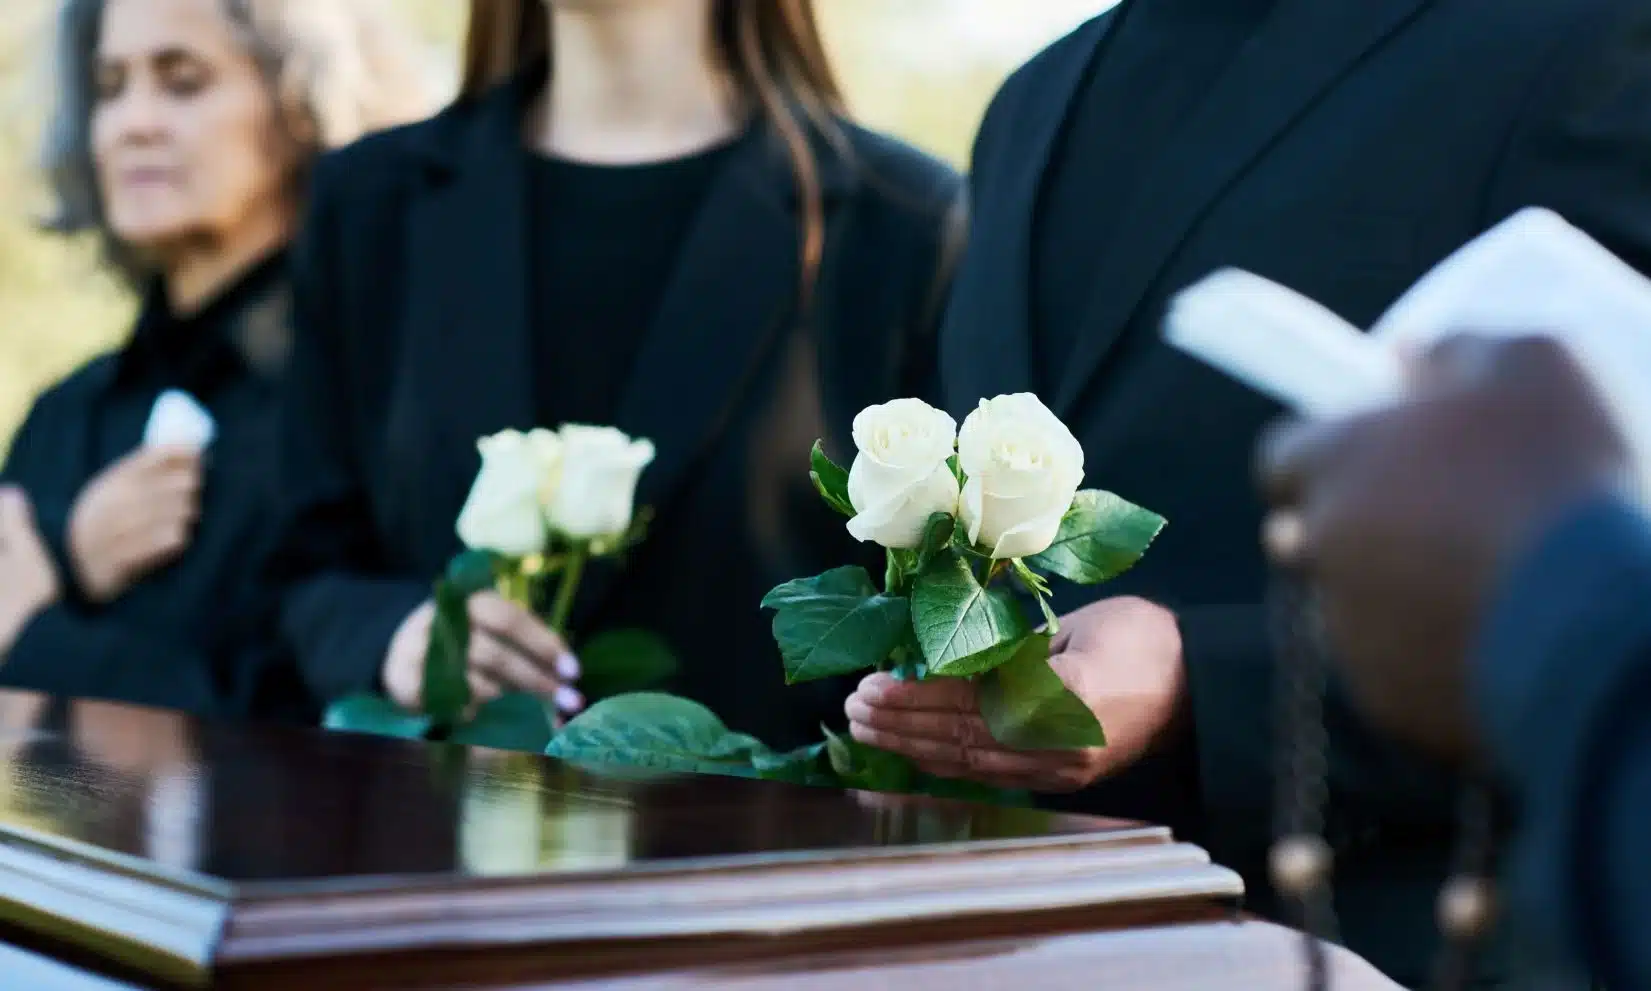 A crowd gathered around a casket at a funeral, mourning the deceased.